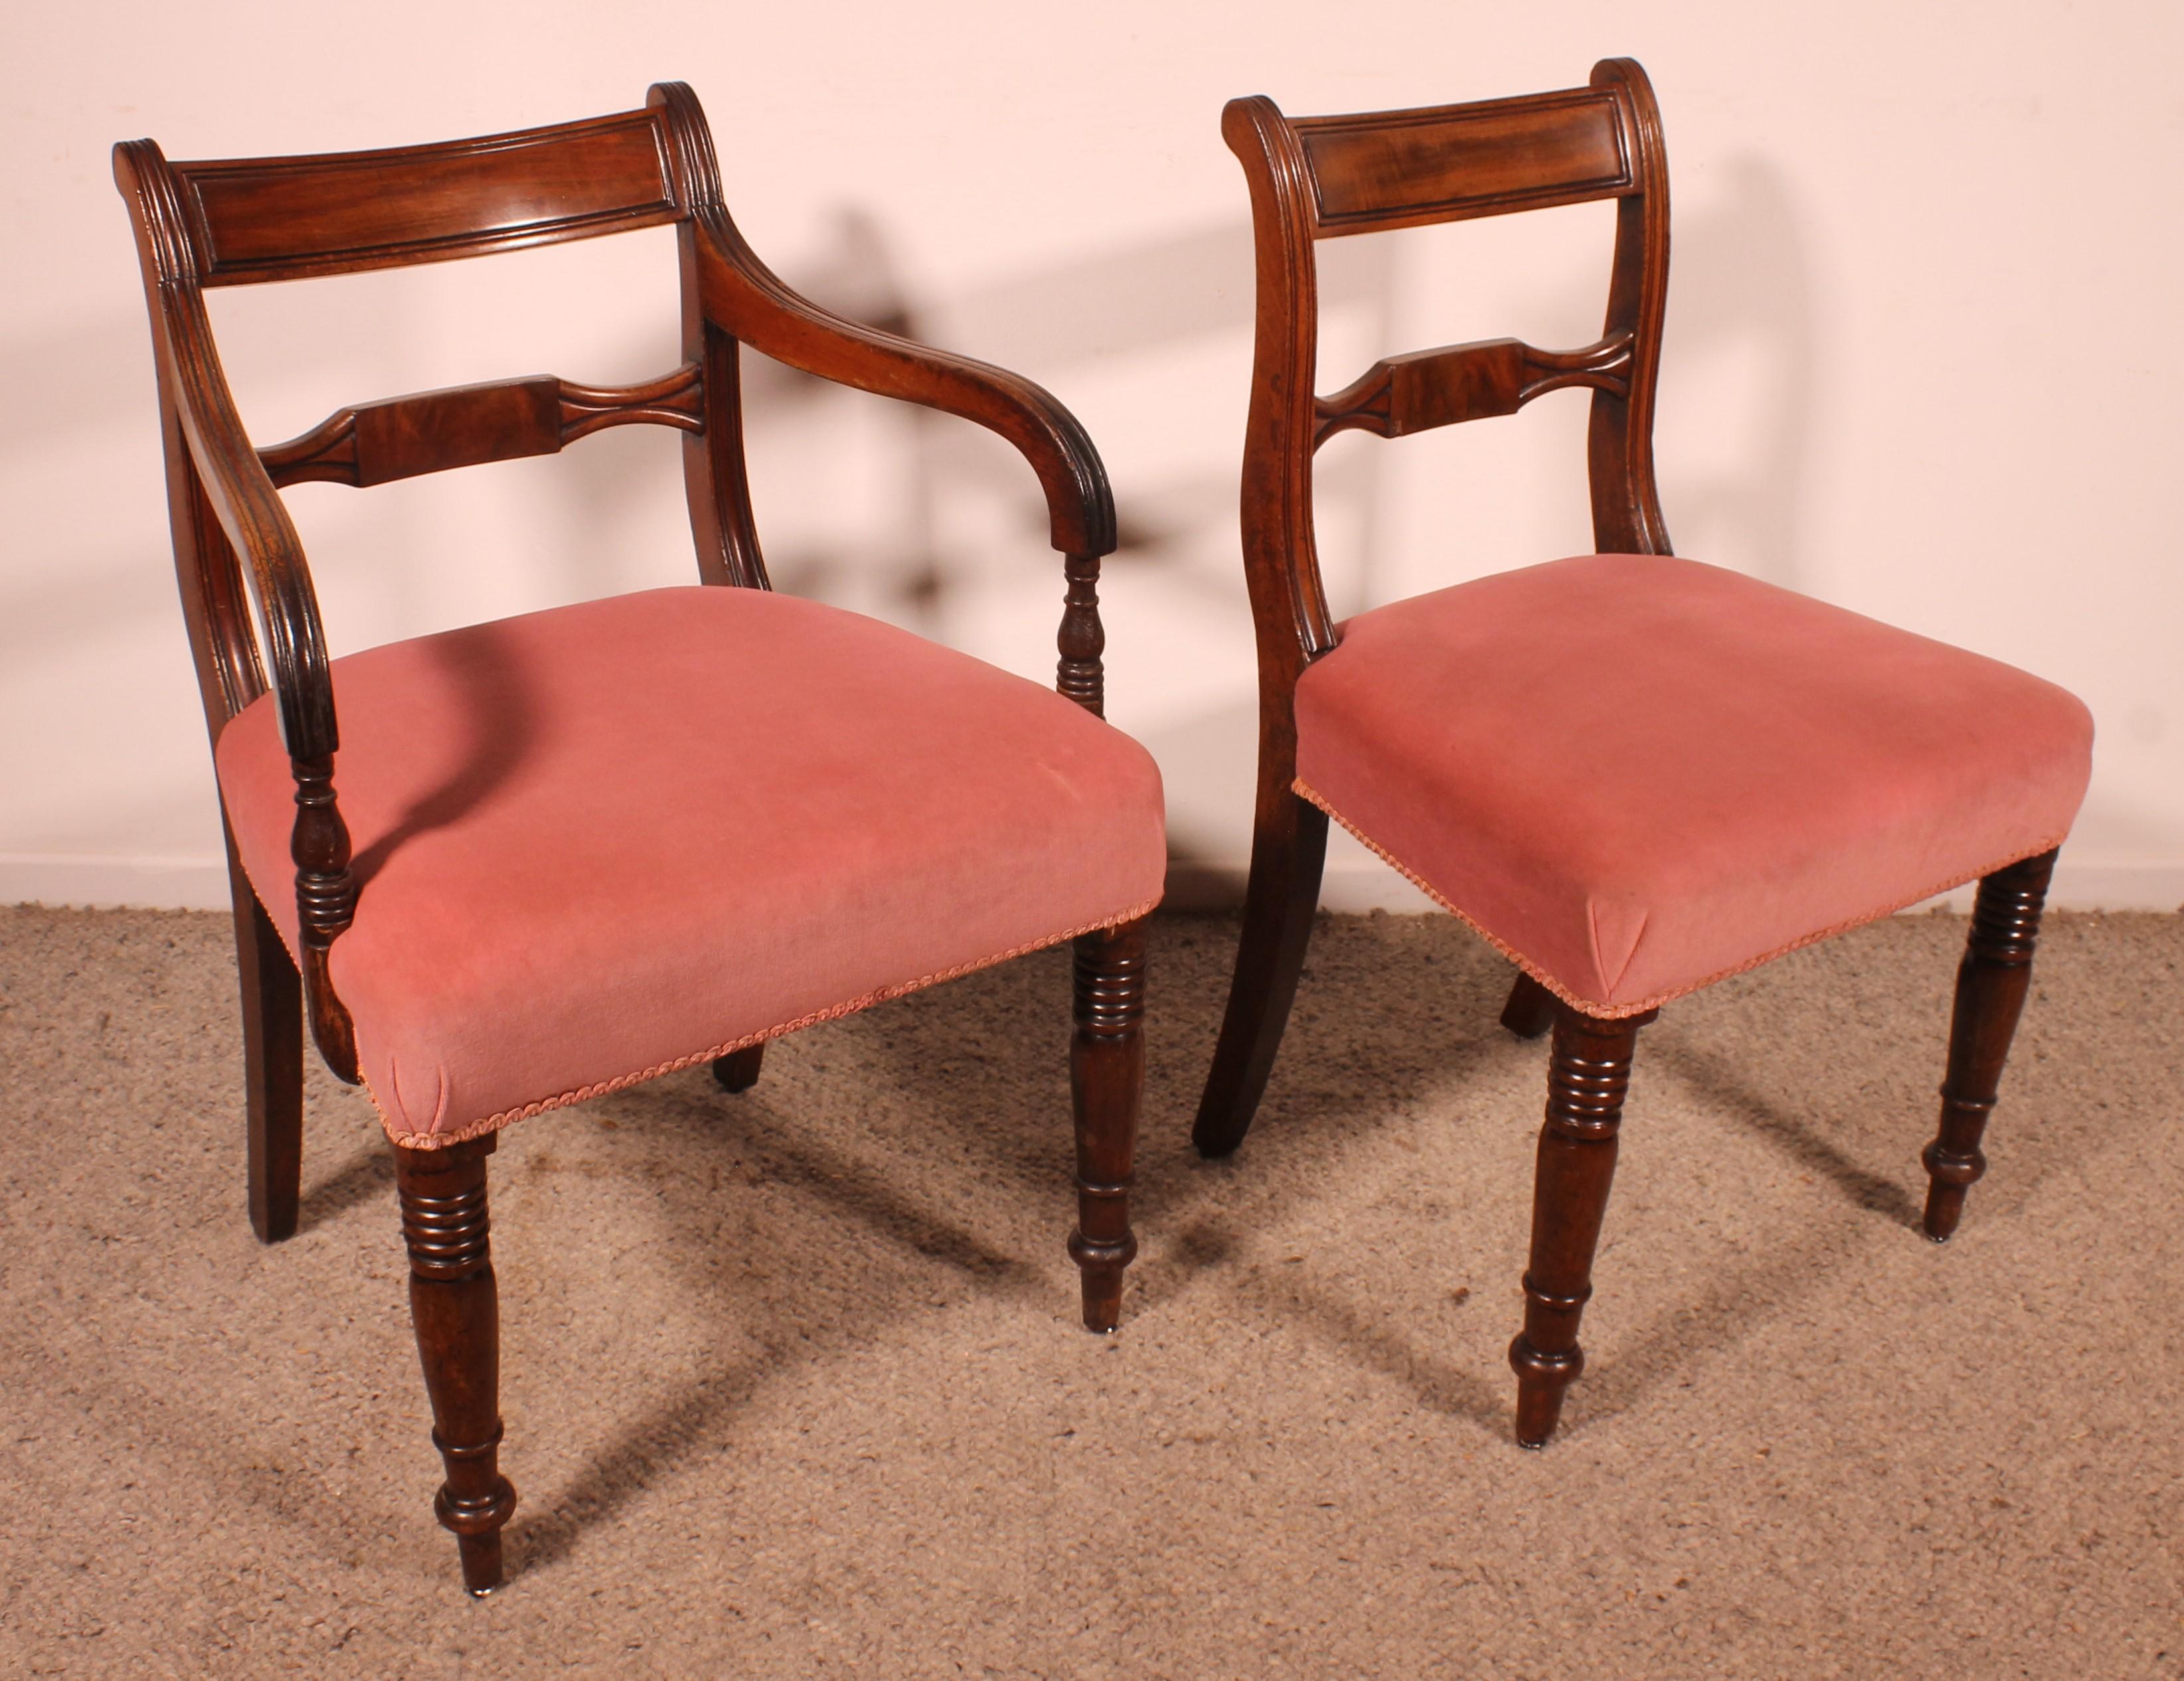 British Set Of 4 Chairs And Two Armchairs From The 18th Century In Mahogany For Sale